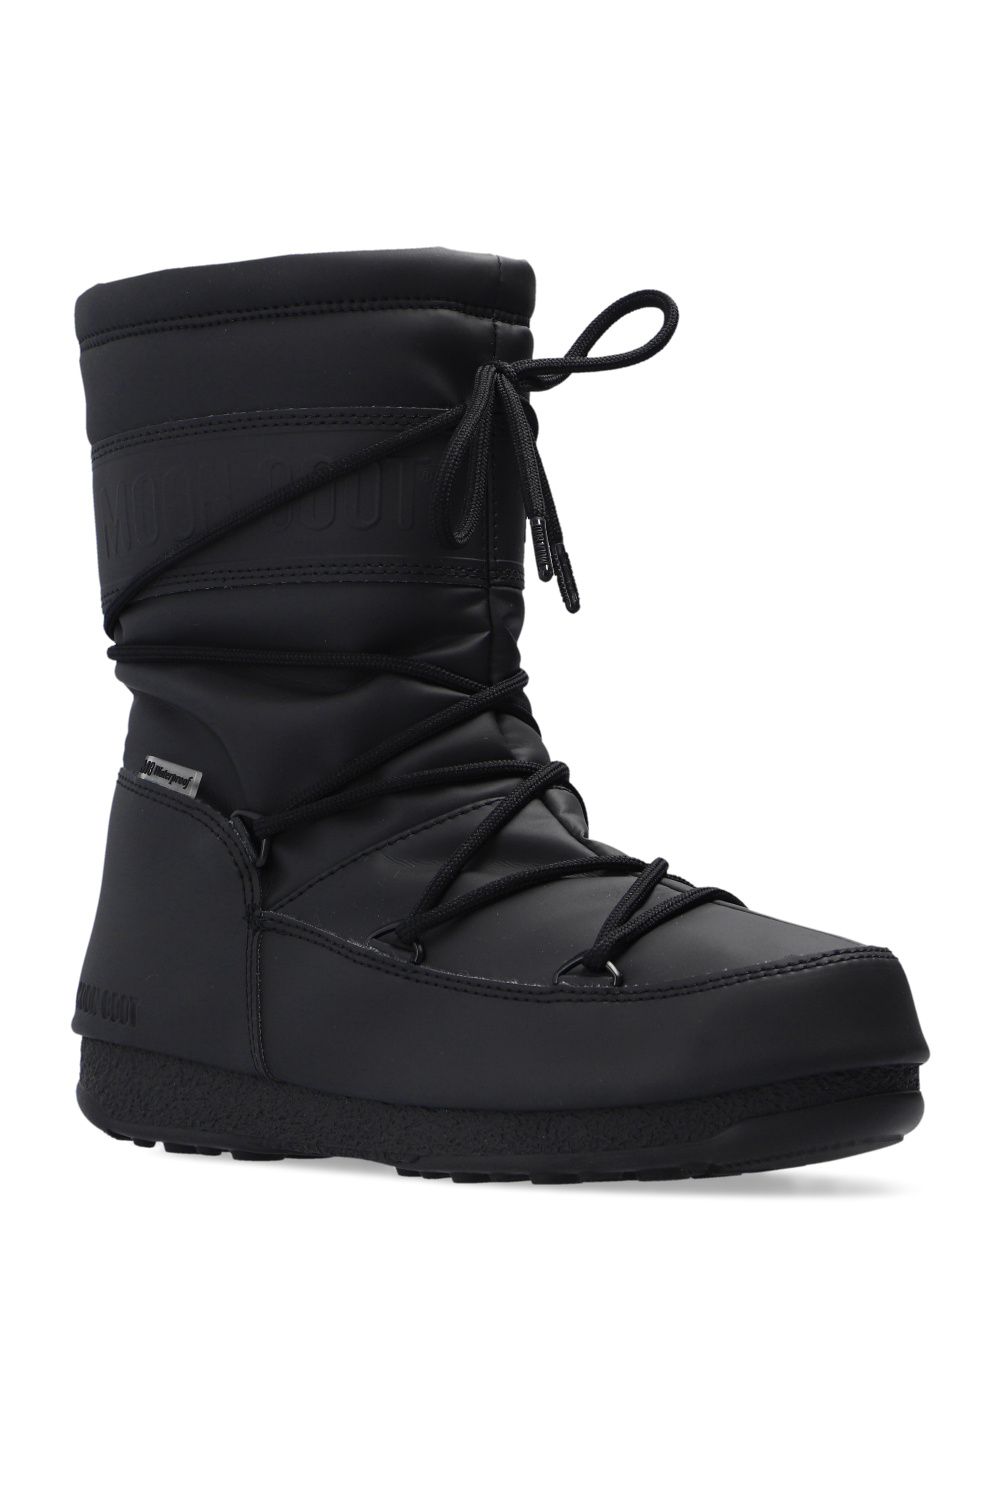 Moon Boot ‘Mid Rubber’ snow boots